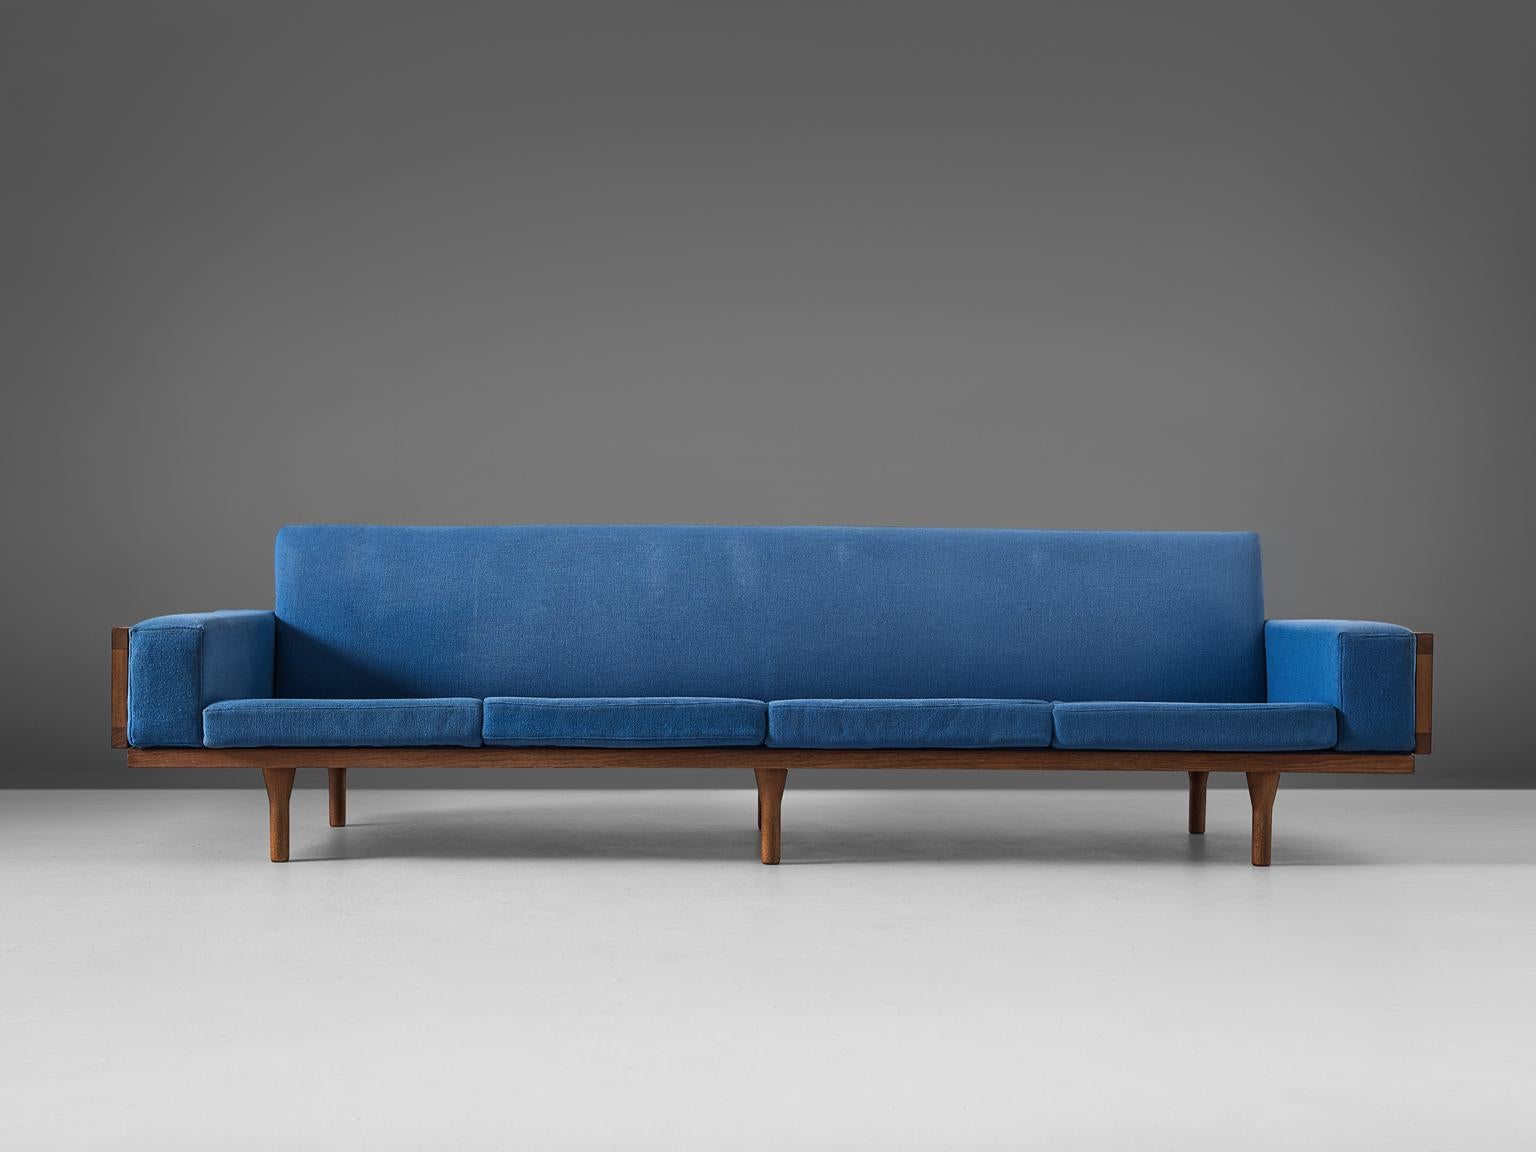 Illum Wikkelsø for Søren Willadsen, sofa, teak and fabric, Denmark, 1960s.

Large four-seat sofa with floating character. This sofa breaths the ideals of Illum Wikkelsø. The wide seating invites to sit on. The high back and lower armrests